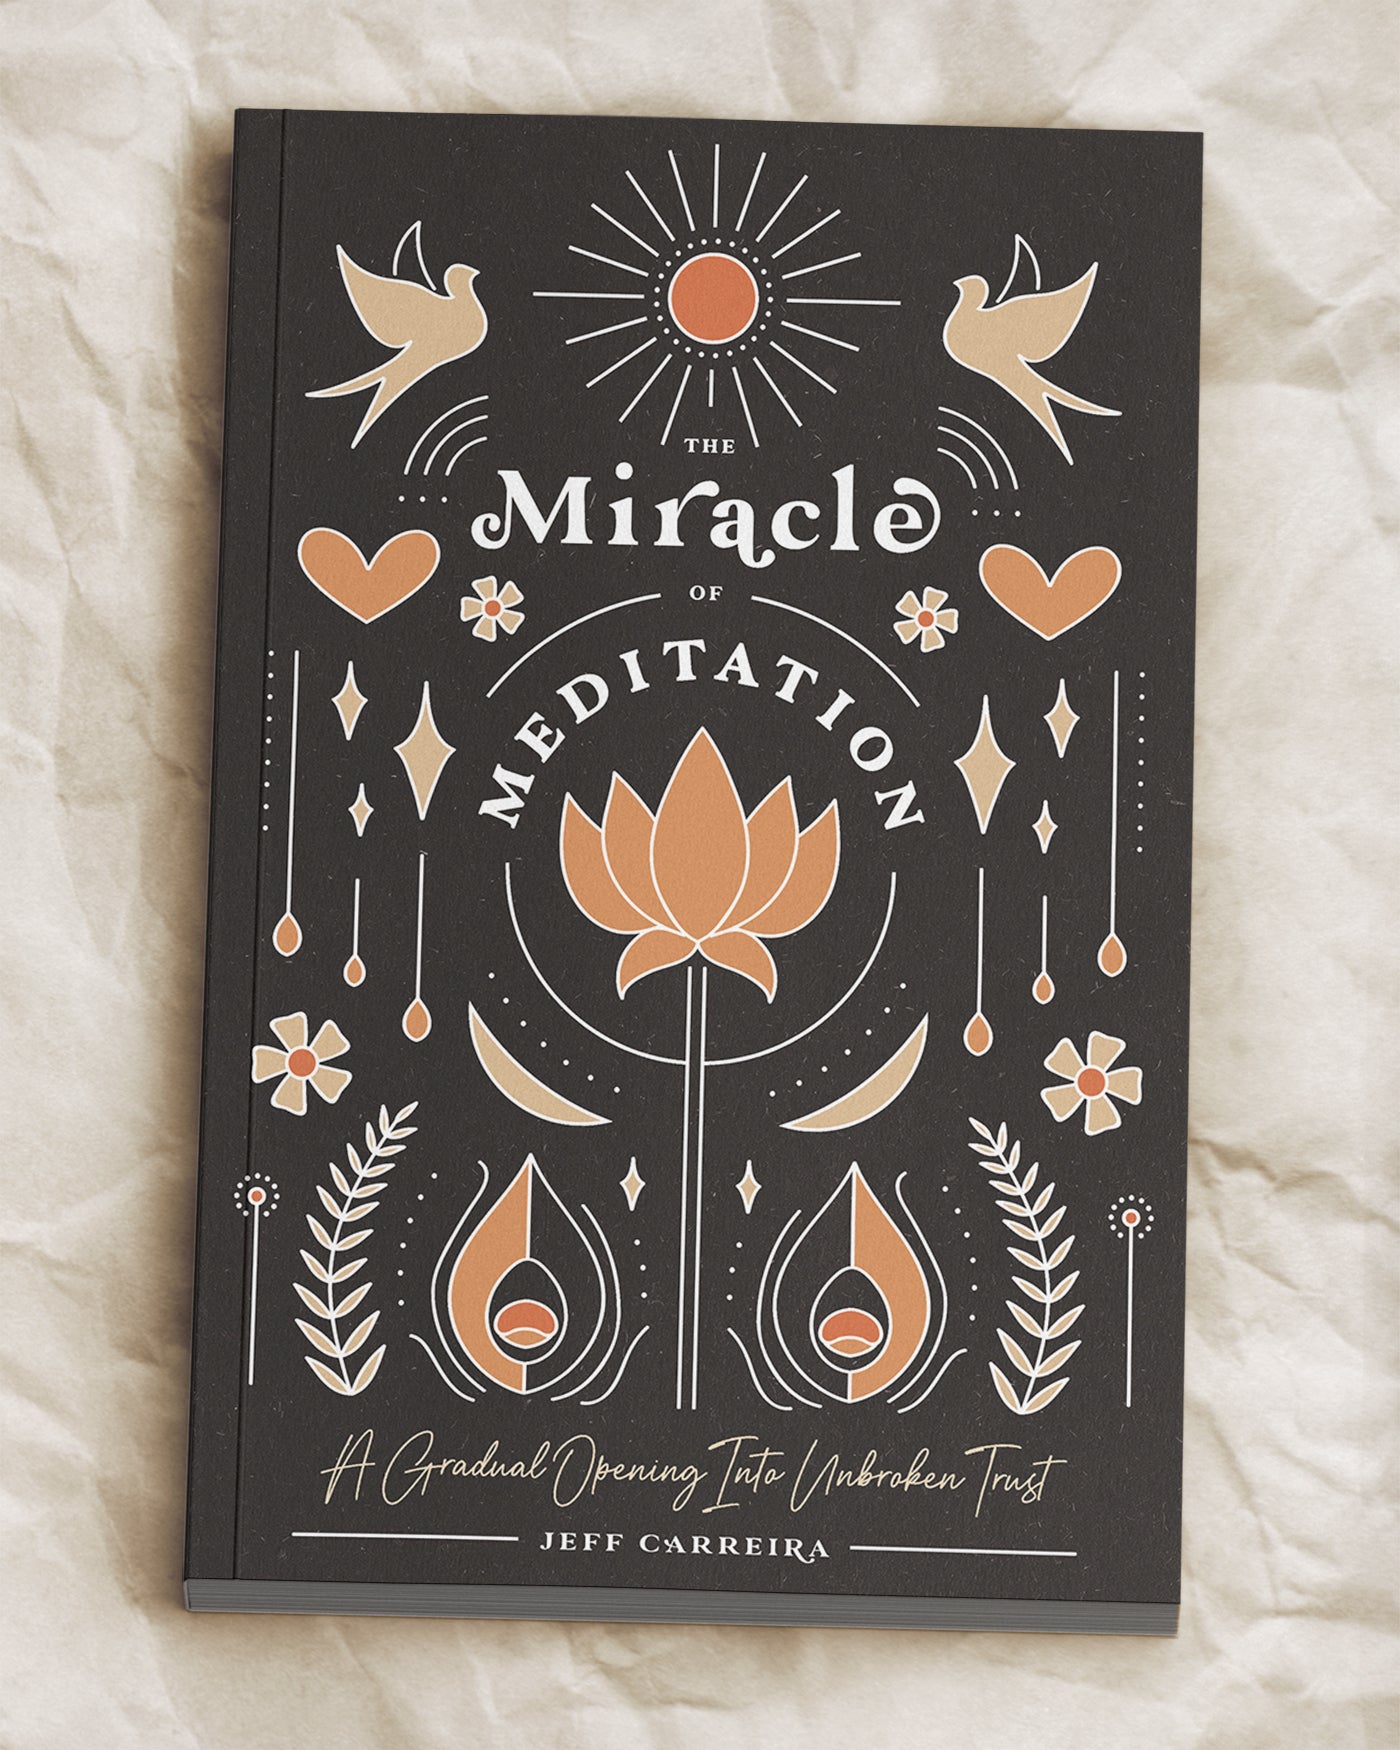 The Miracle of Meditation Bundle [Card Deck & Books]